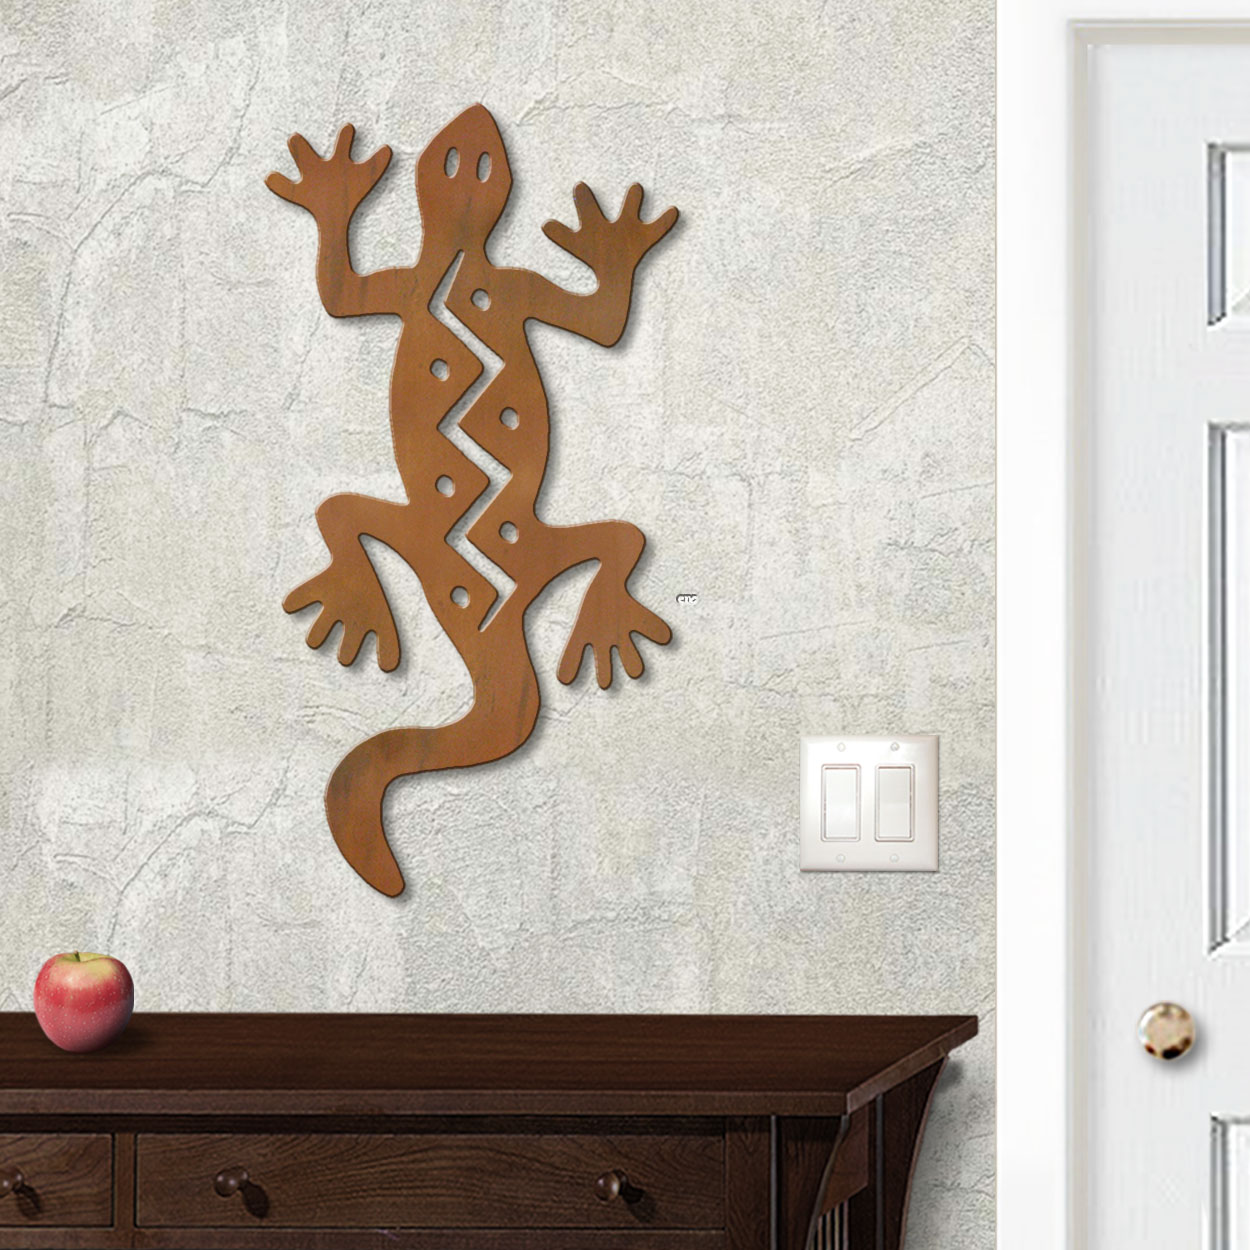 625038r - 18in or 24in Floating Metal Wall Art - Climbing Gecko - Rust Patina